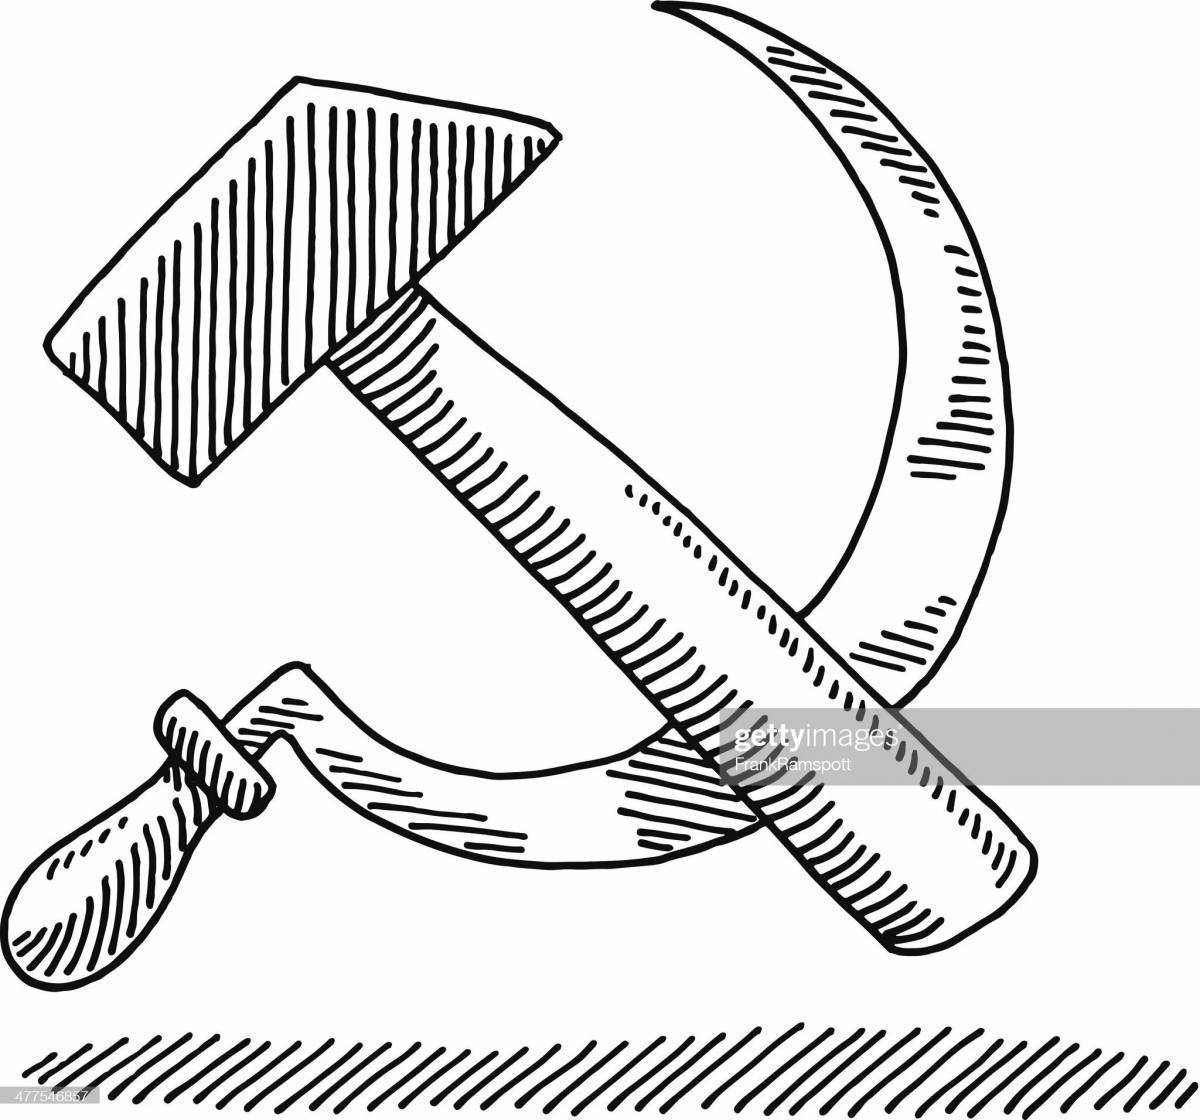 Great hammer and sickle coloring book